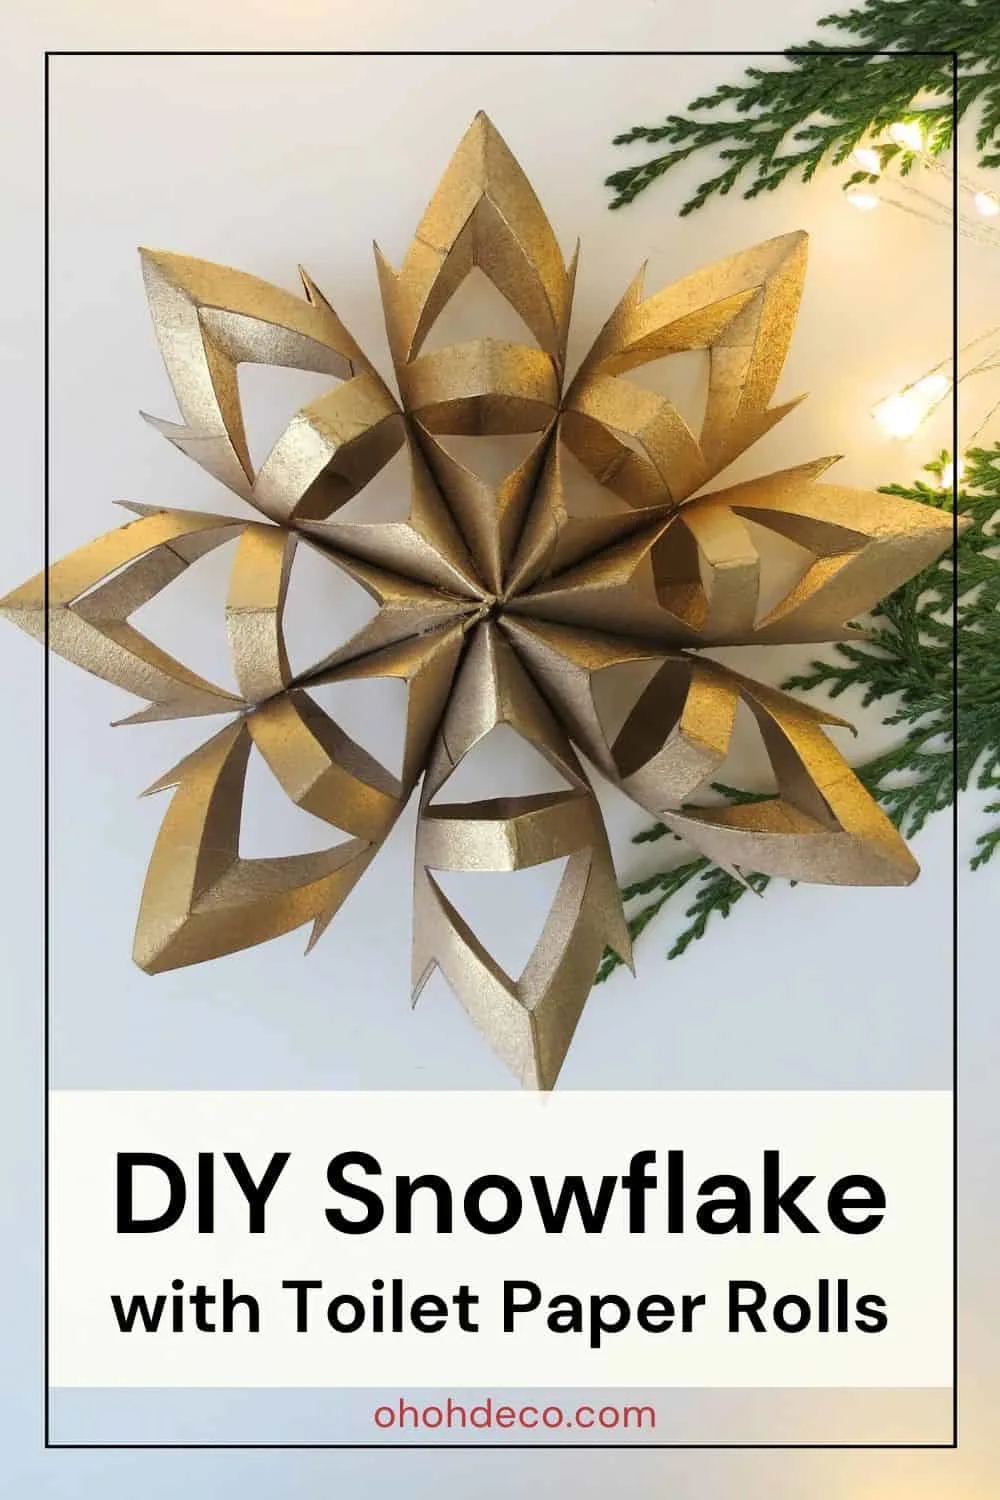 DIY Snowflake with toilet paper rolls